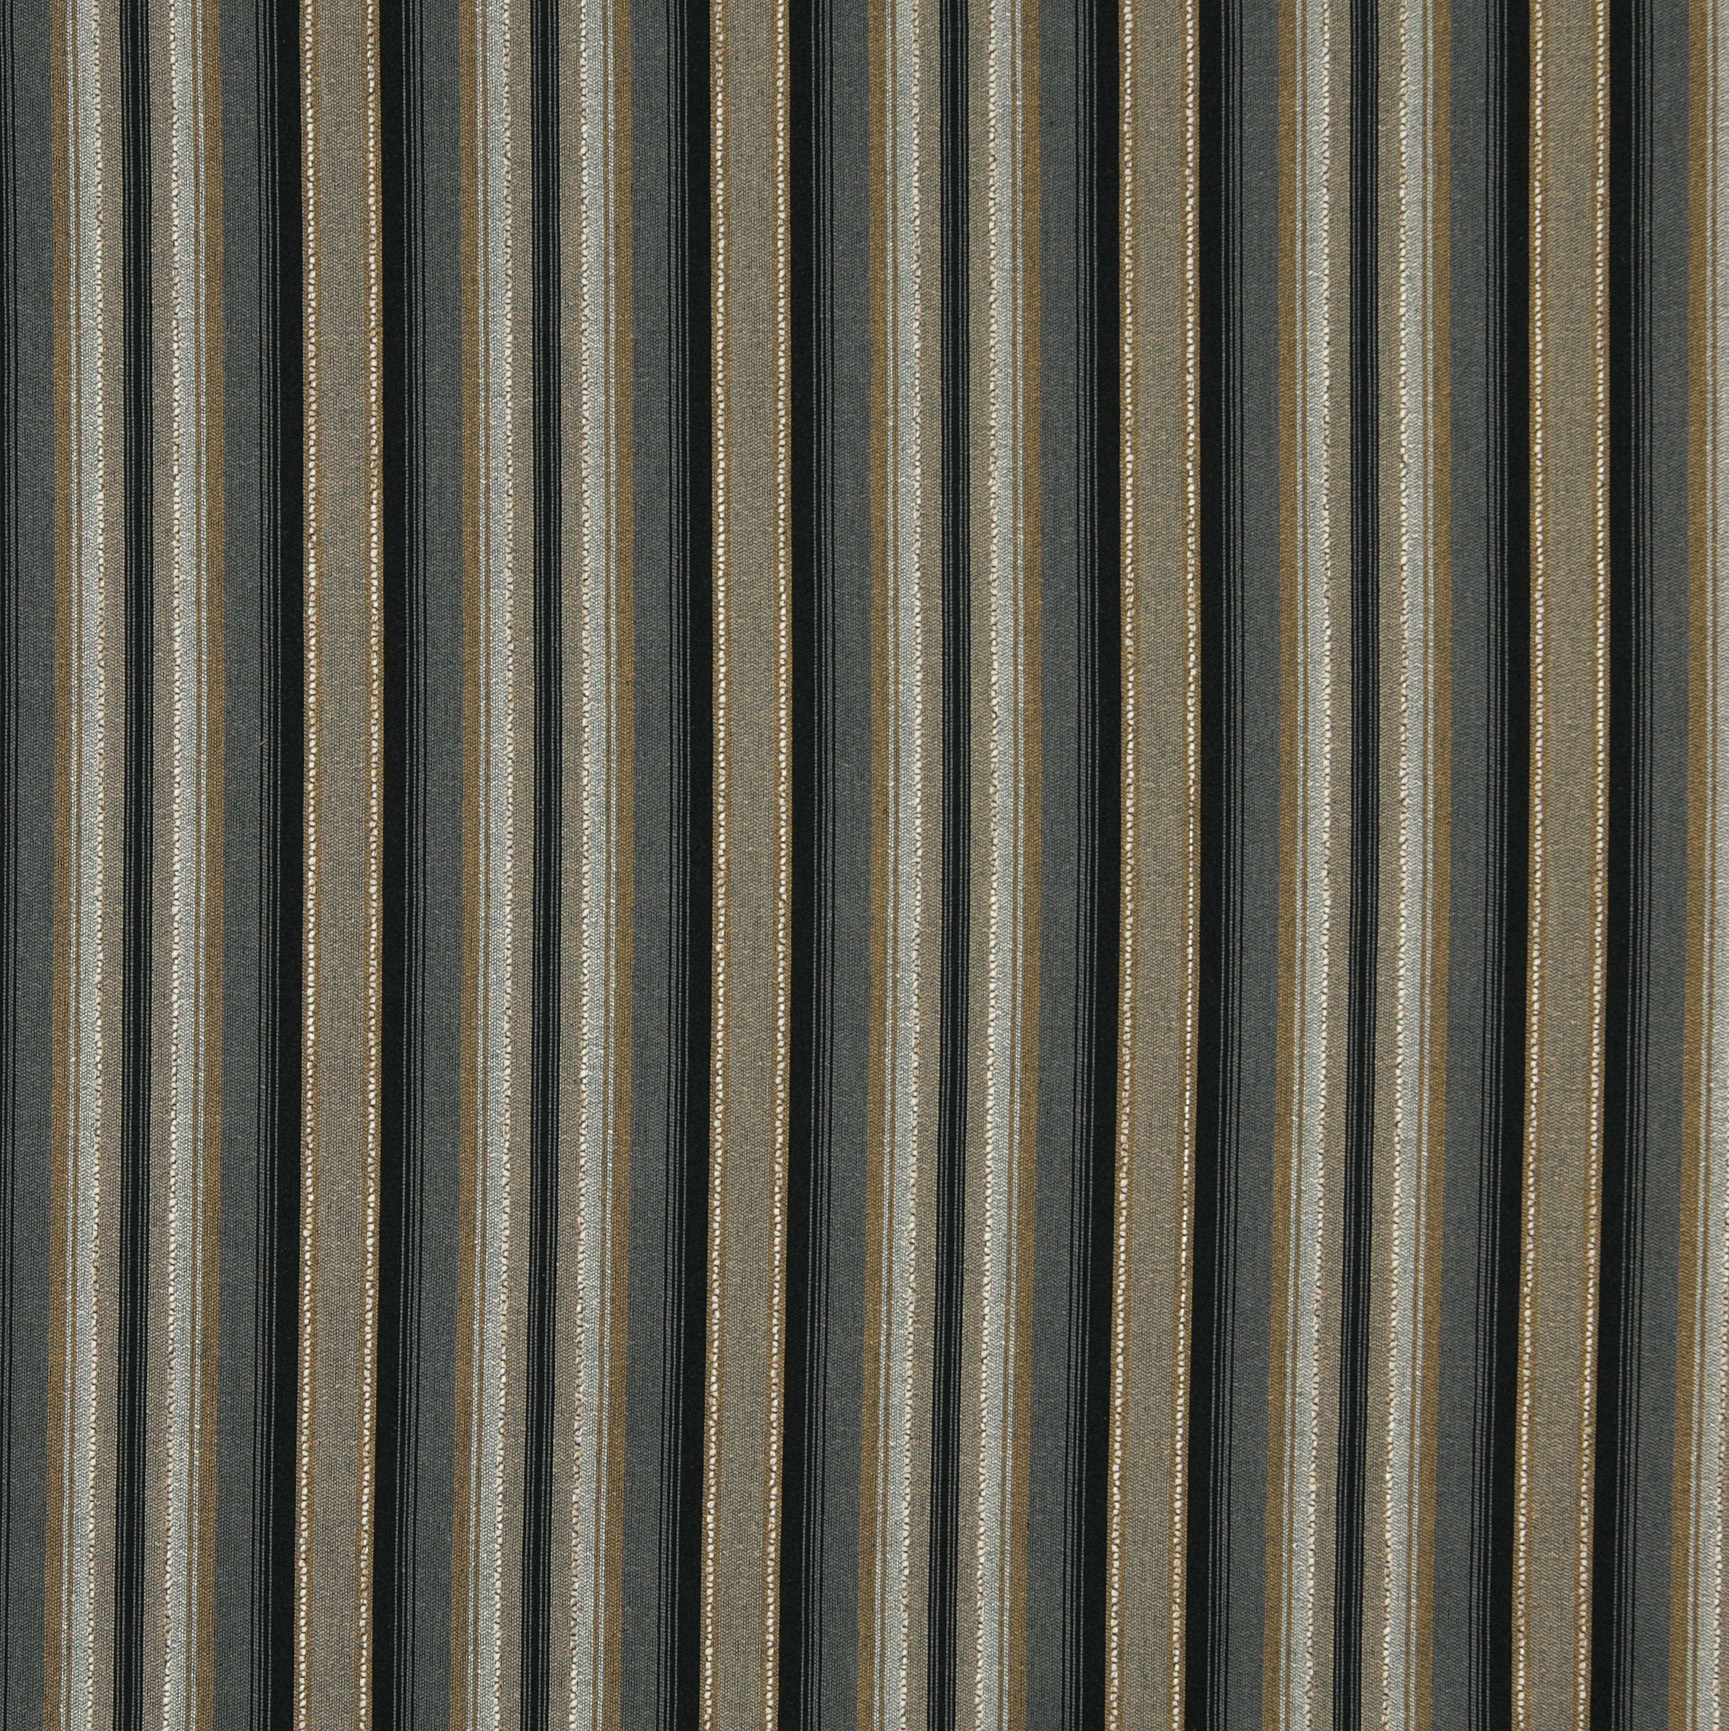 Onyx Black and Tan Gray Gold Accent Stripe Linen Upholstery Fabric